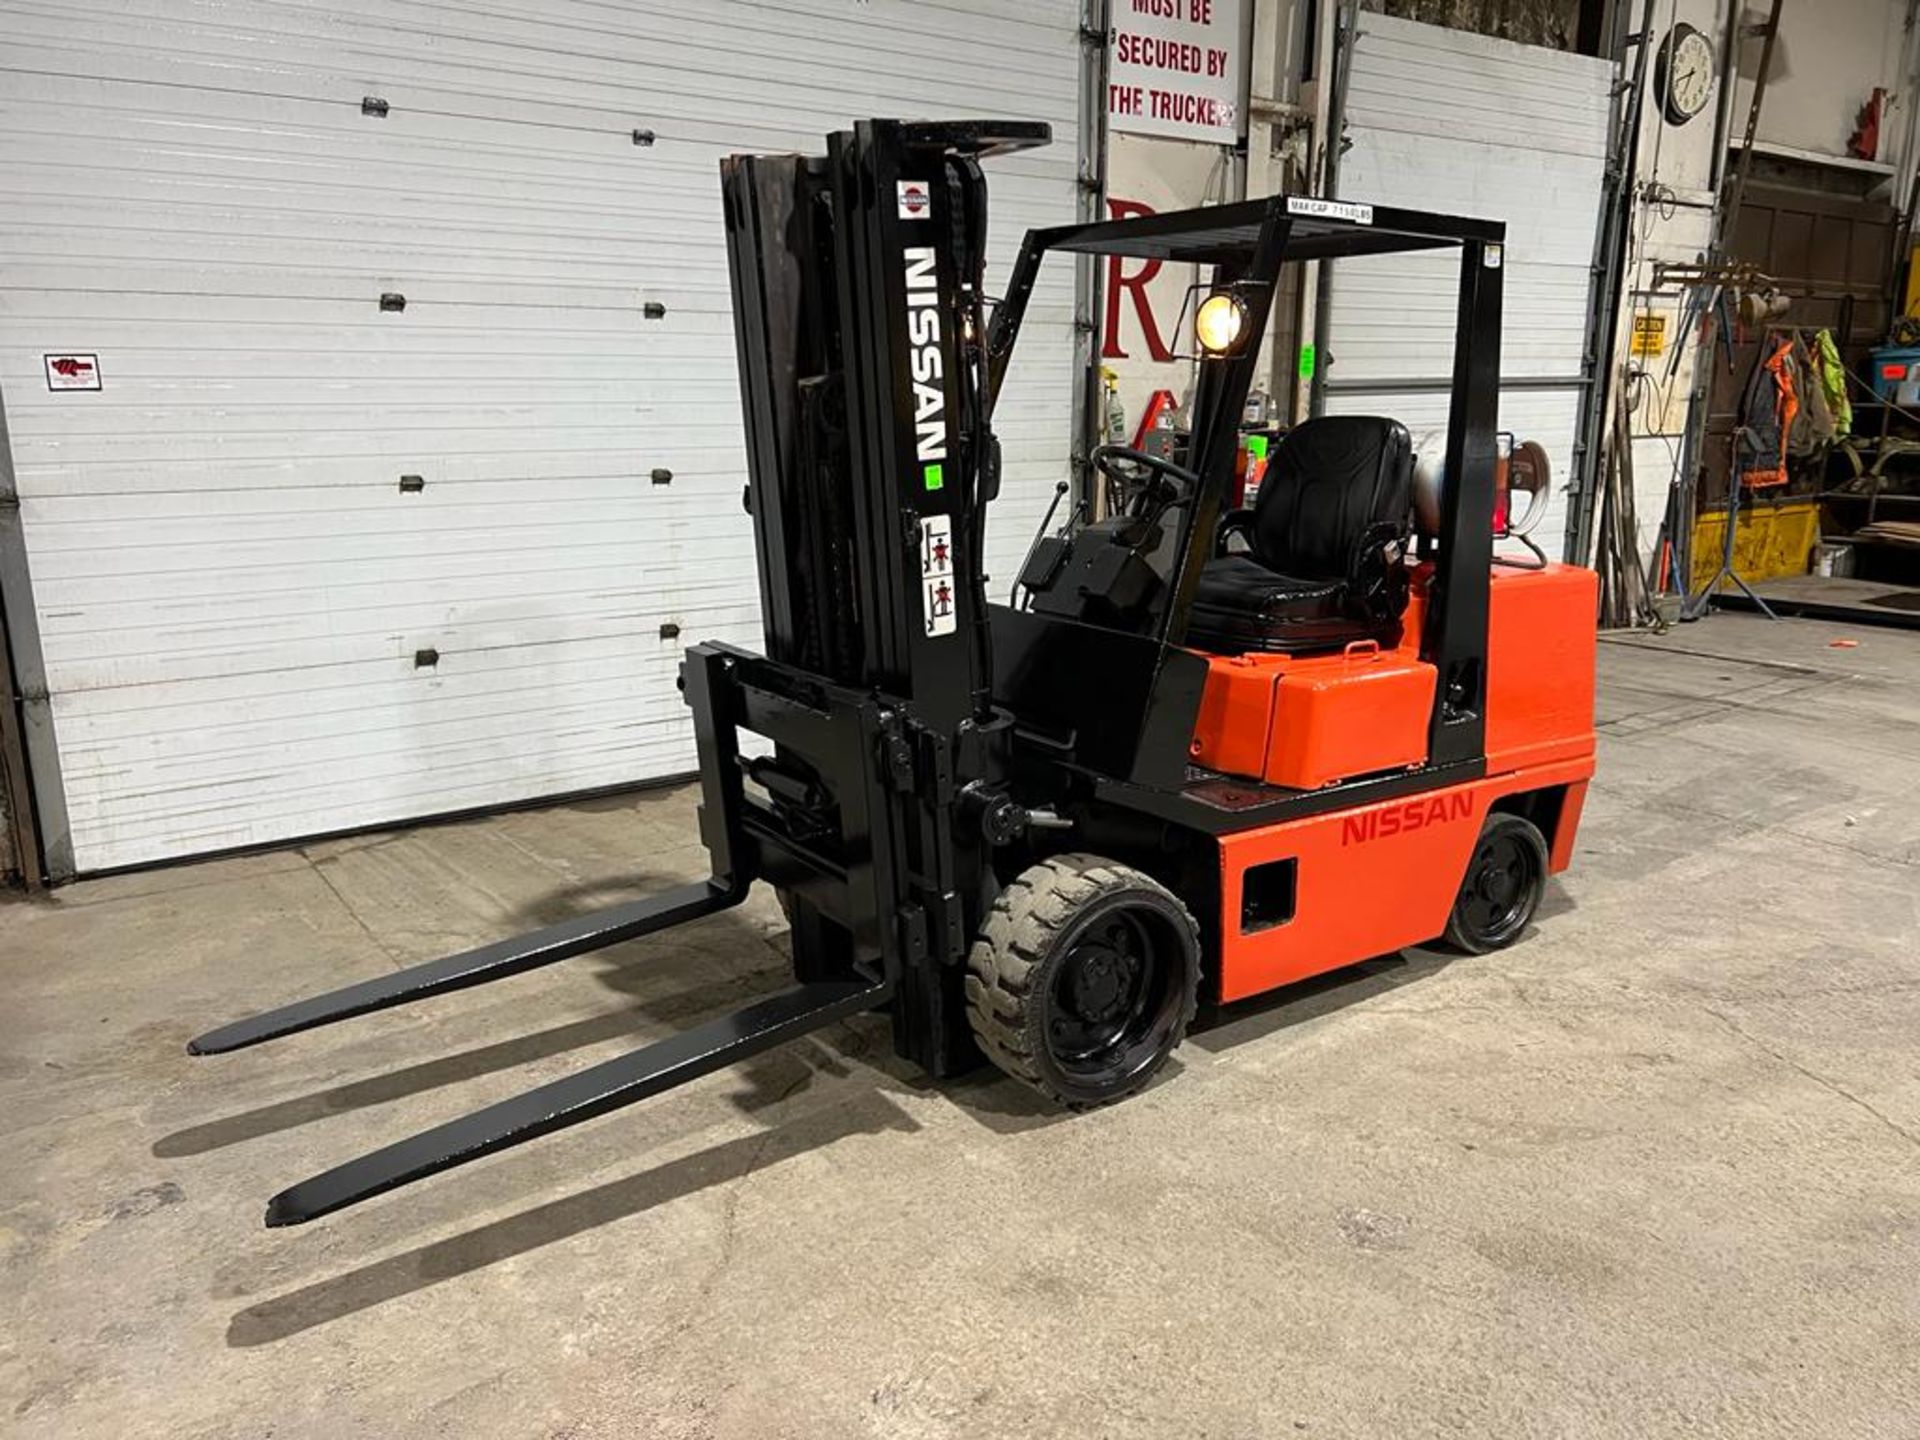 NICE Nissan 7,150lbs Capacity Forklift LPG (propane) with Sideshift 3-stage mast and LOW HOURS - Image 4 of 5